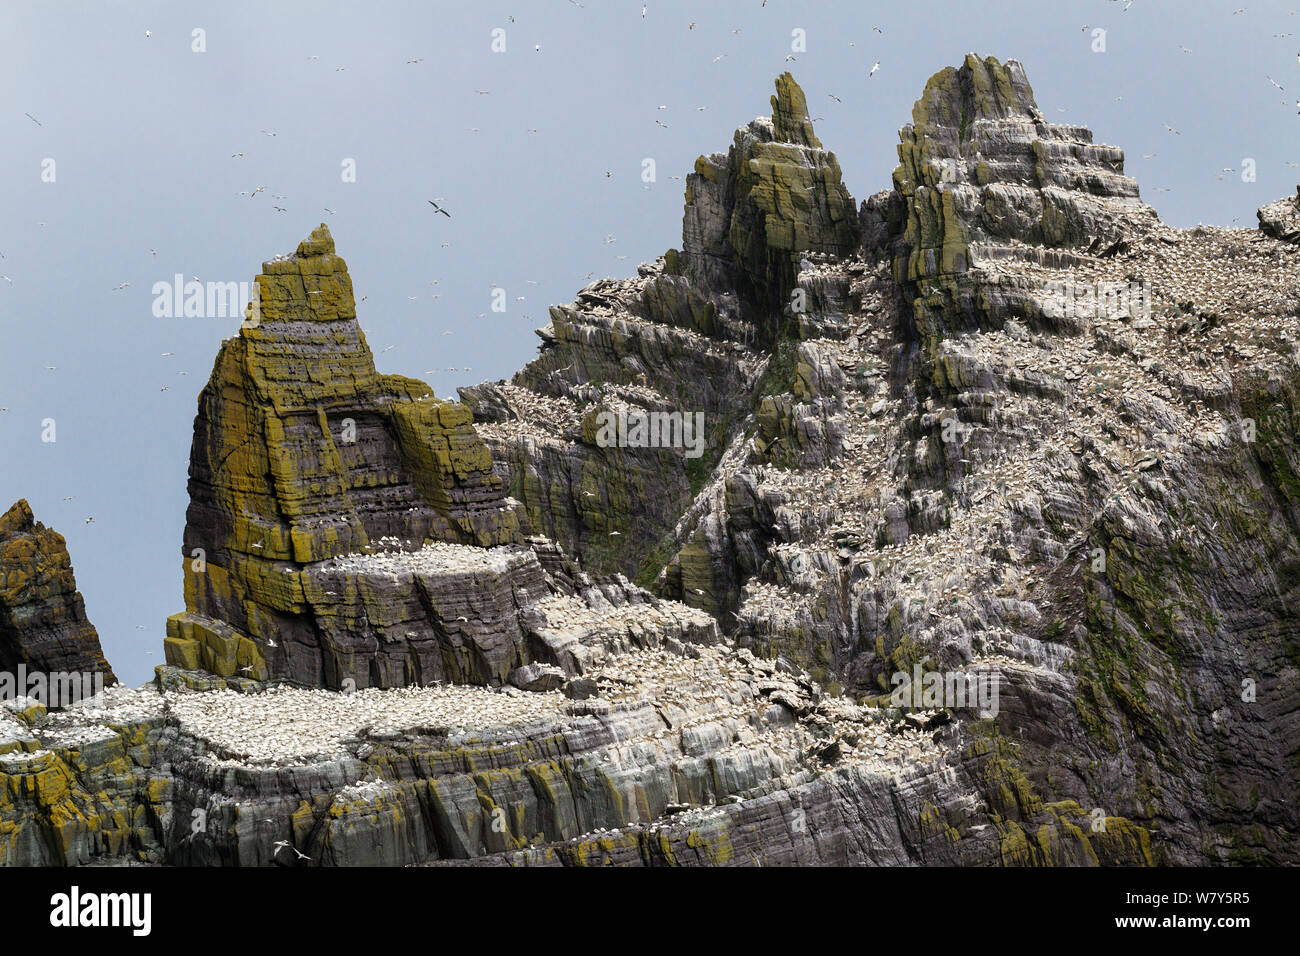 Northern gannet (Morus bassanus) breeding colony on the Old Red Sandstone cliffs of this rugged island, with birds wheeling through the air. Little Skellig, County Kerry, Ireland. July. Stock Photo